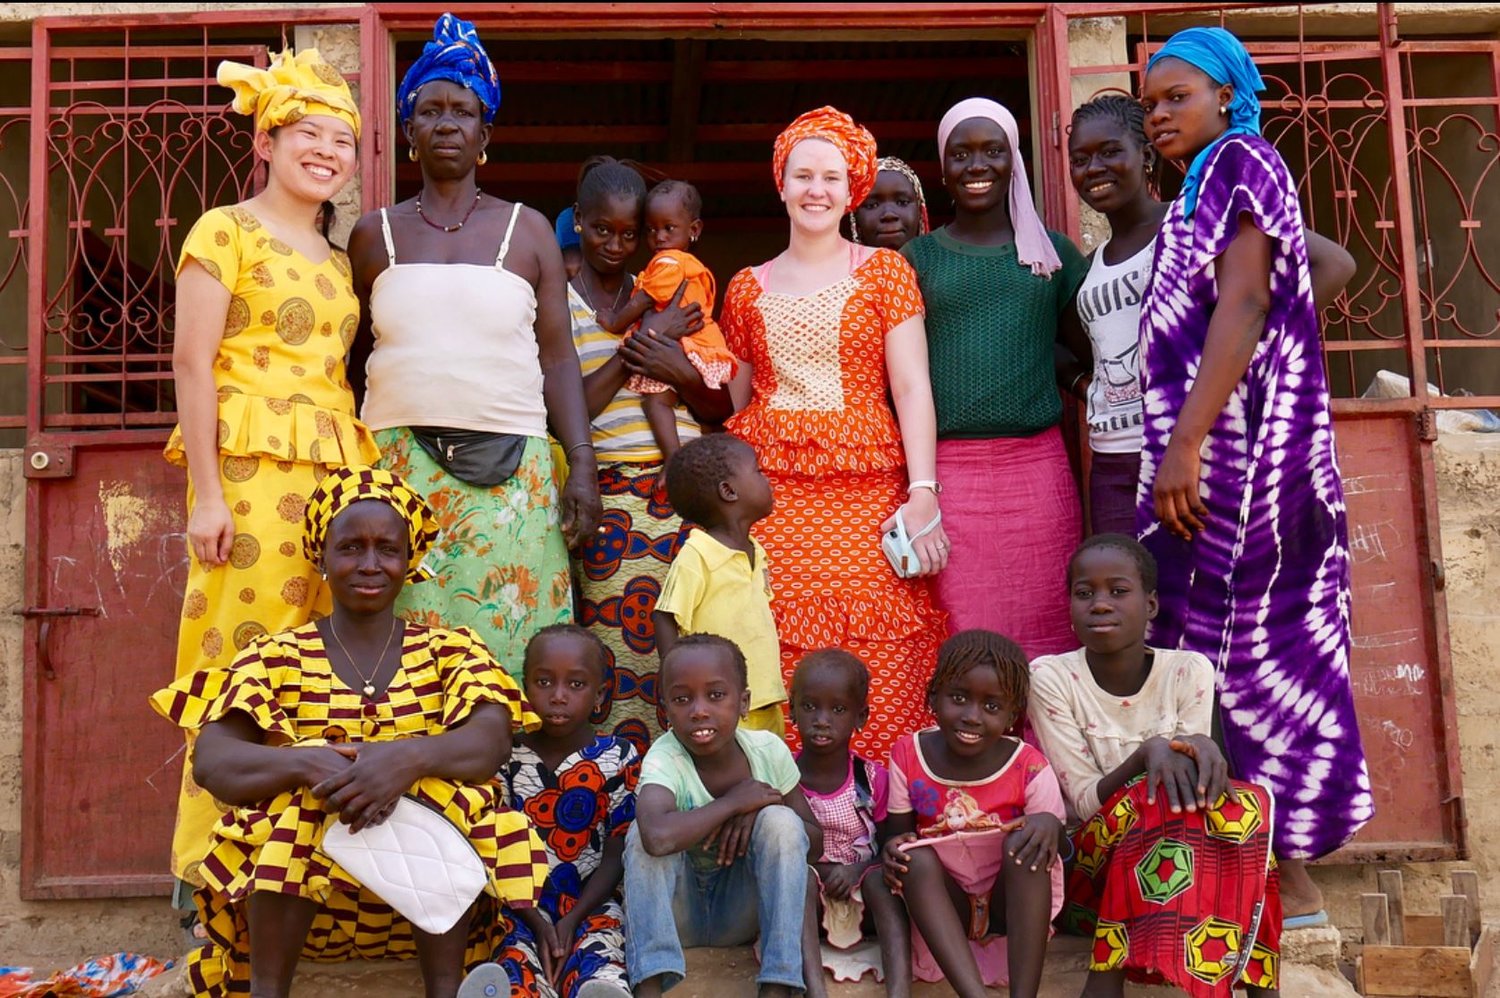 A group of students with local Senegalese people, all of whom are wearing colorful Senegalese clothing